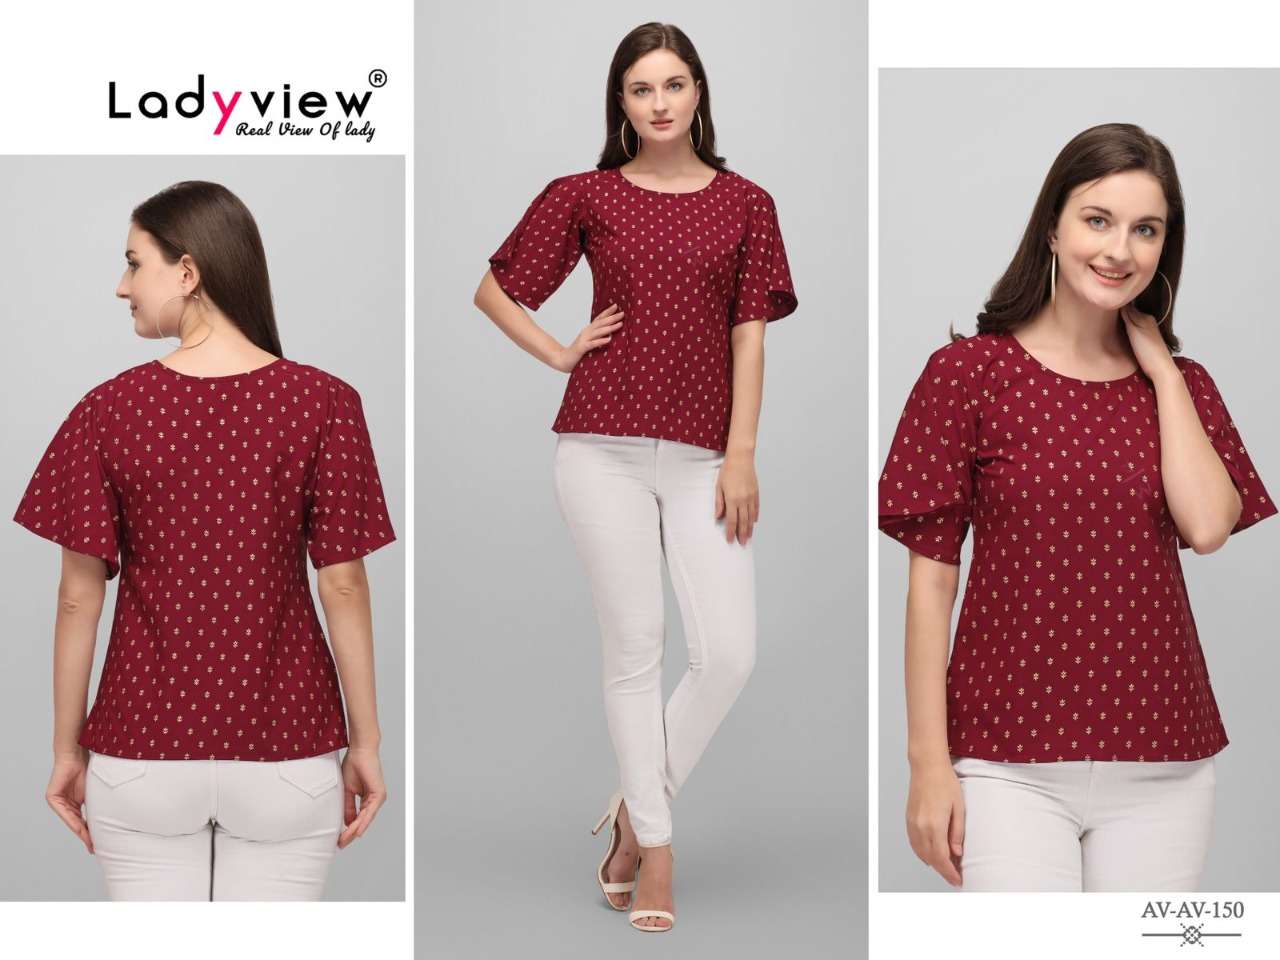 Ladyview Stylish Catalog Gold Foil Printed Western Tops